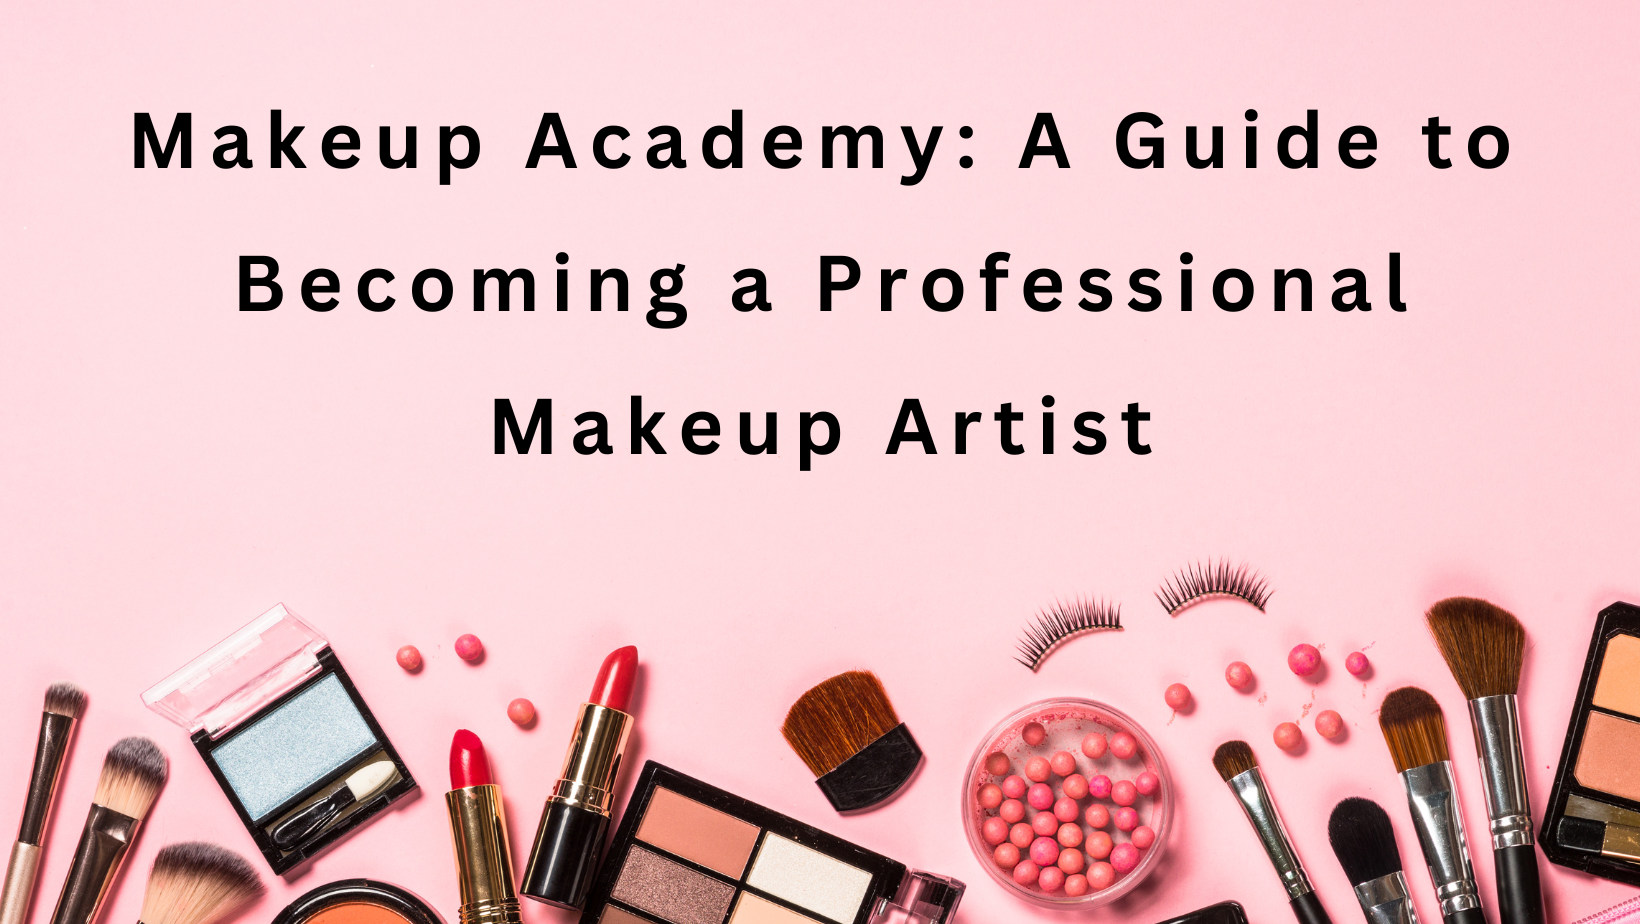 hairstyling school, makeup academy